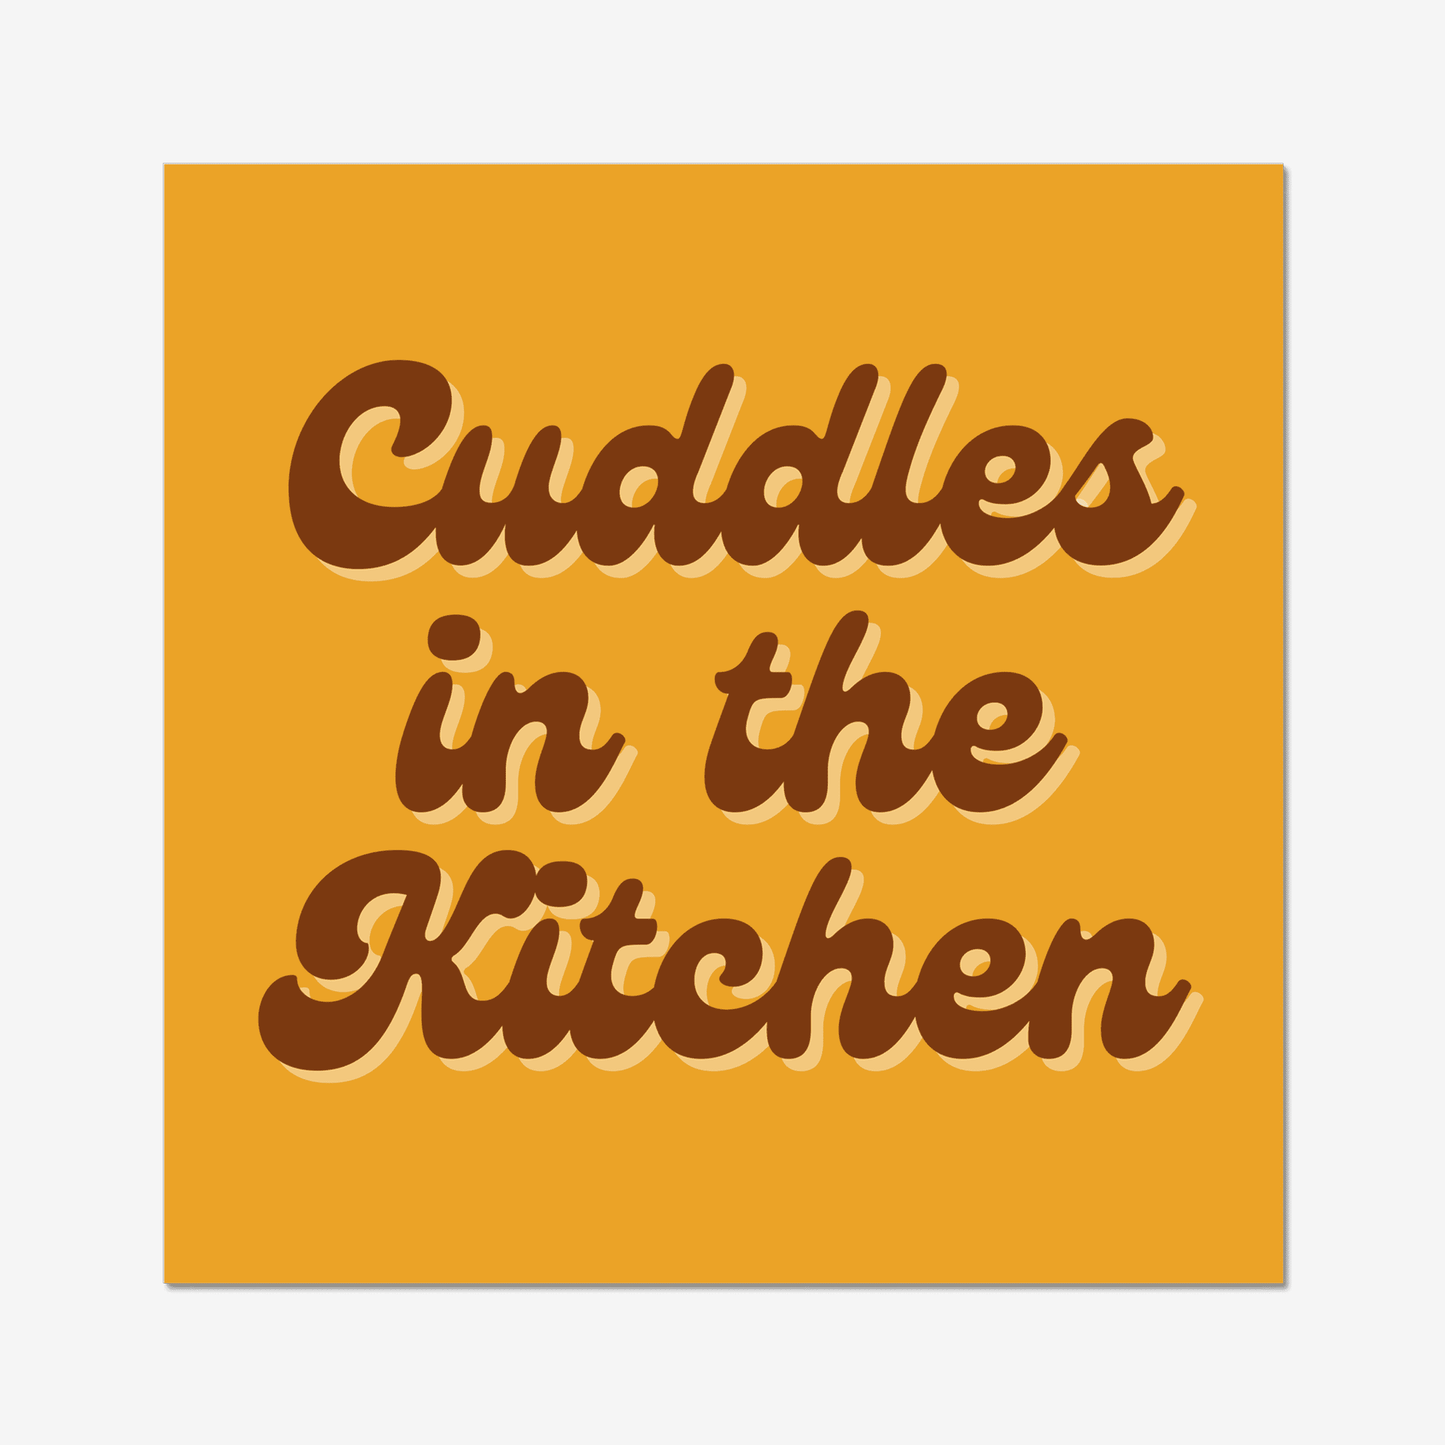 Cuddles in the kitchen art print. A bold and quirky print to make a fun statement in your home. A mustard orange yellow background with a retro brown font. We love this Arctic Monkeys, Mardy Bum inspired print.